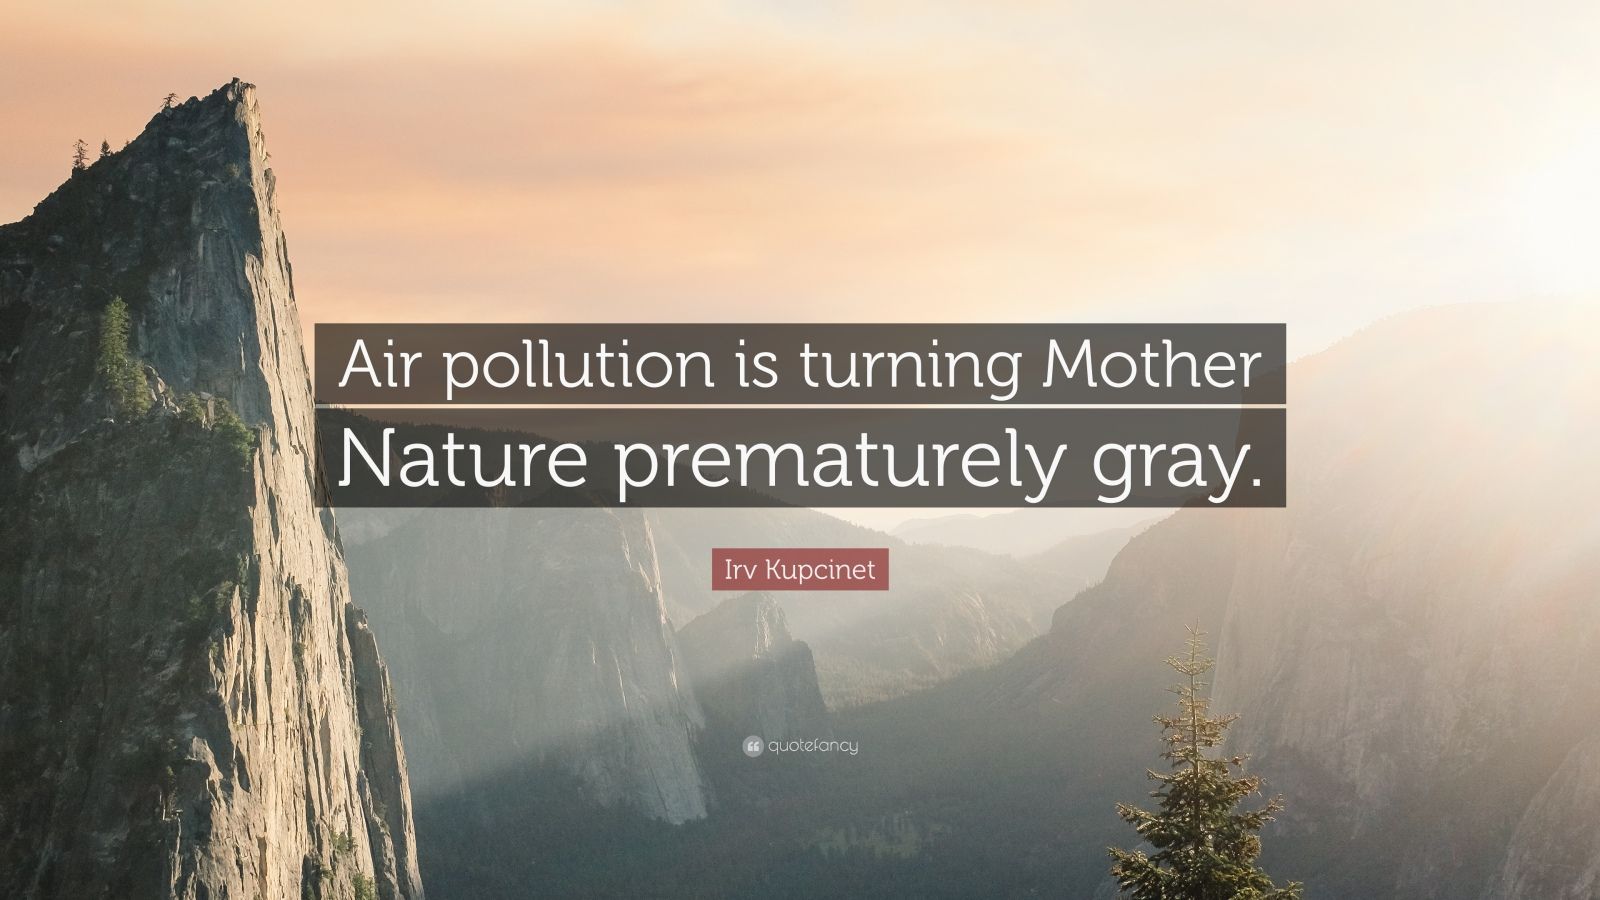 Irv Kupcinet Quote: “Air pollution is turning Mother Nature prematurely